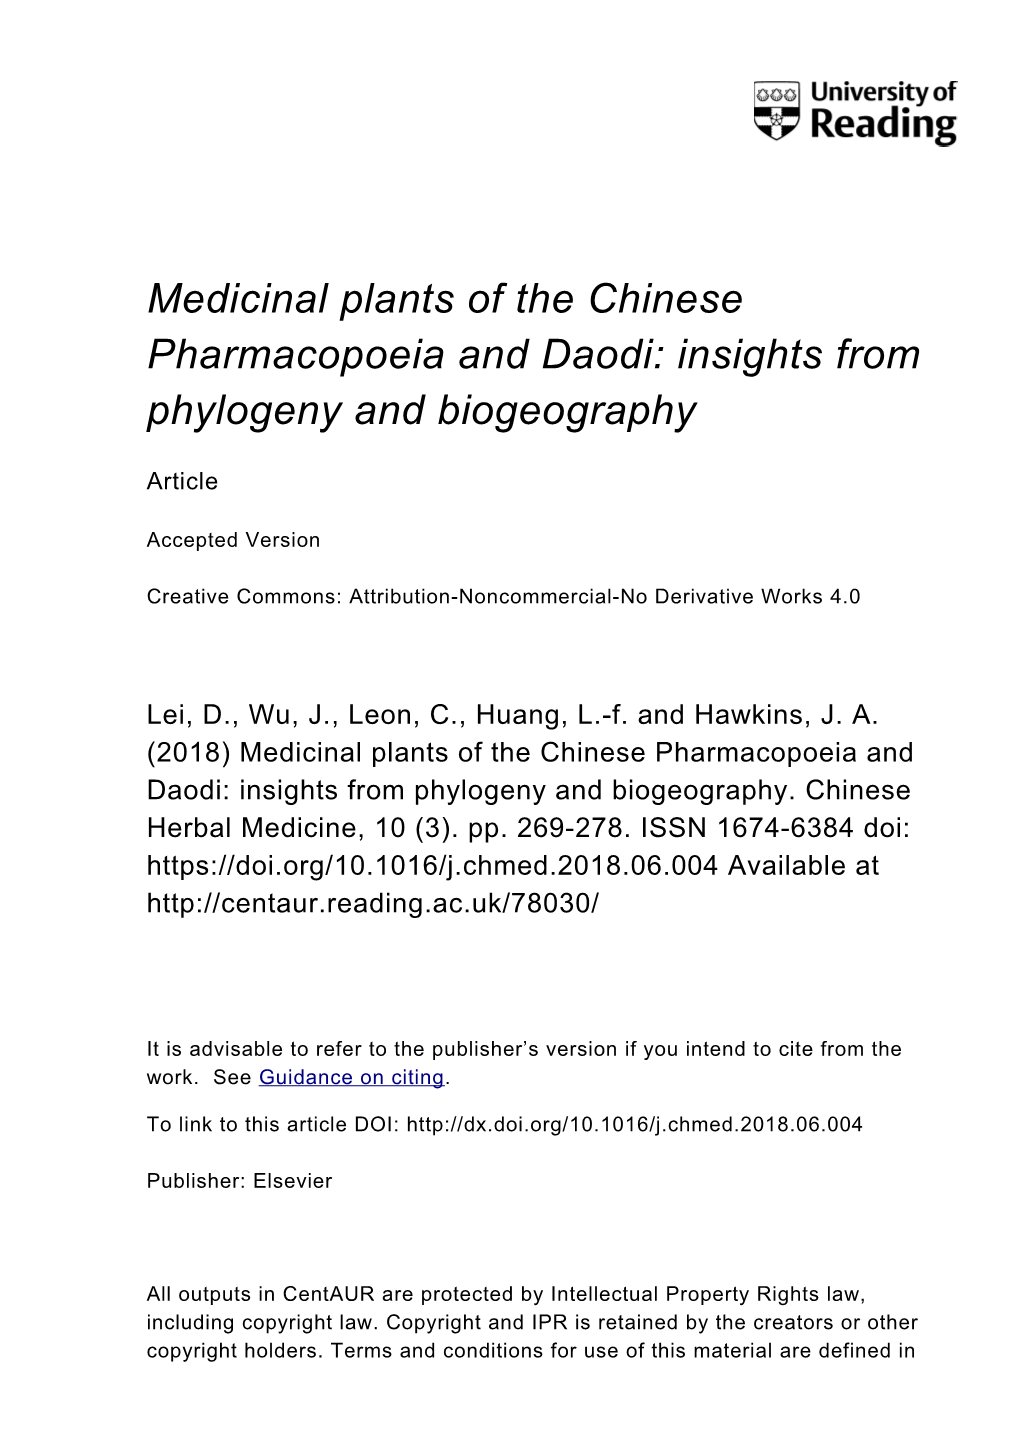 Medicinal Plants of the Chinese Pharmacopoeia and Daodi: Insights from Phylogeny and Biogeography